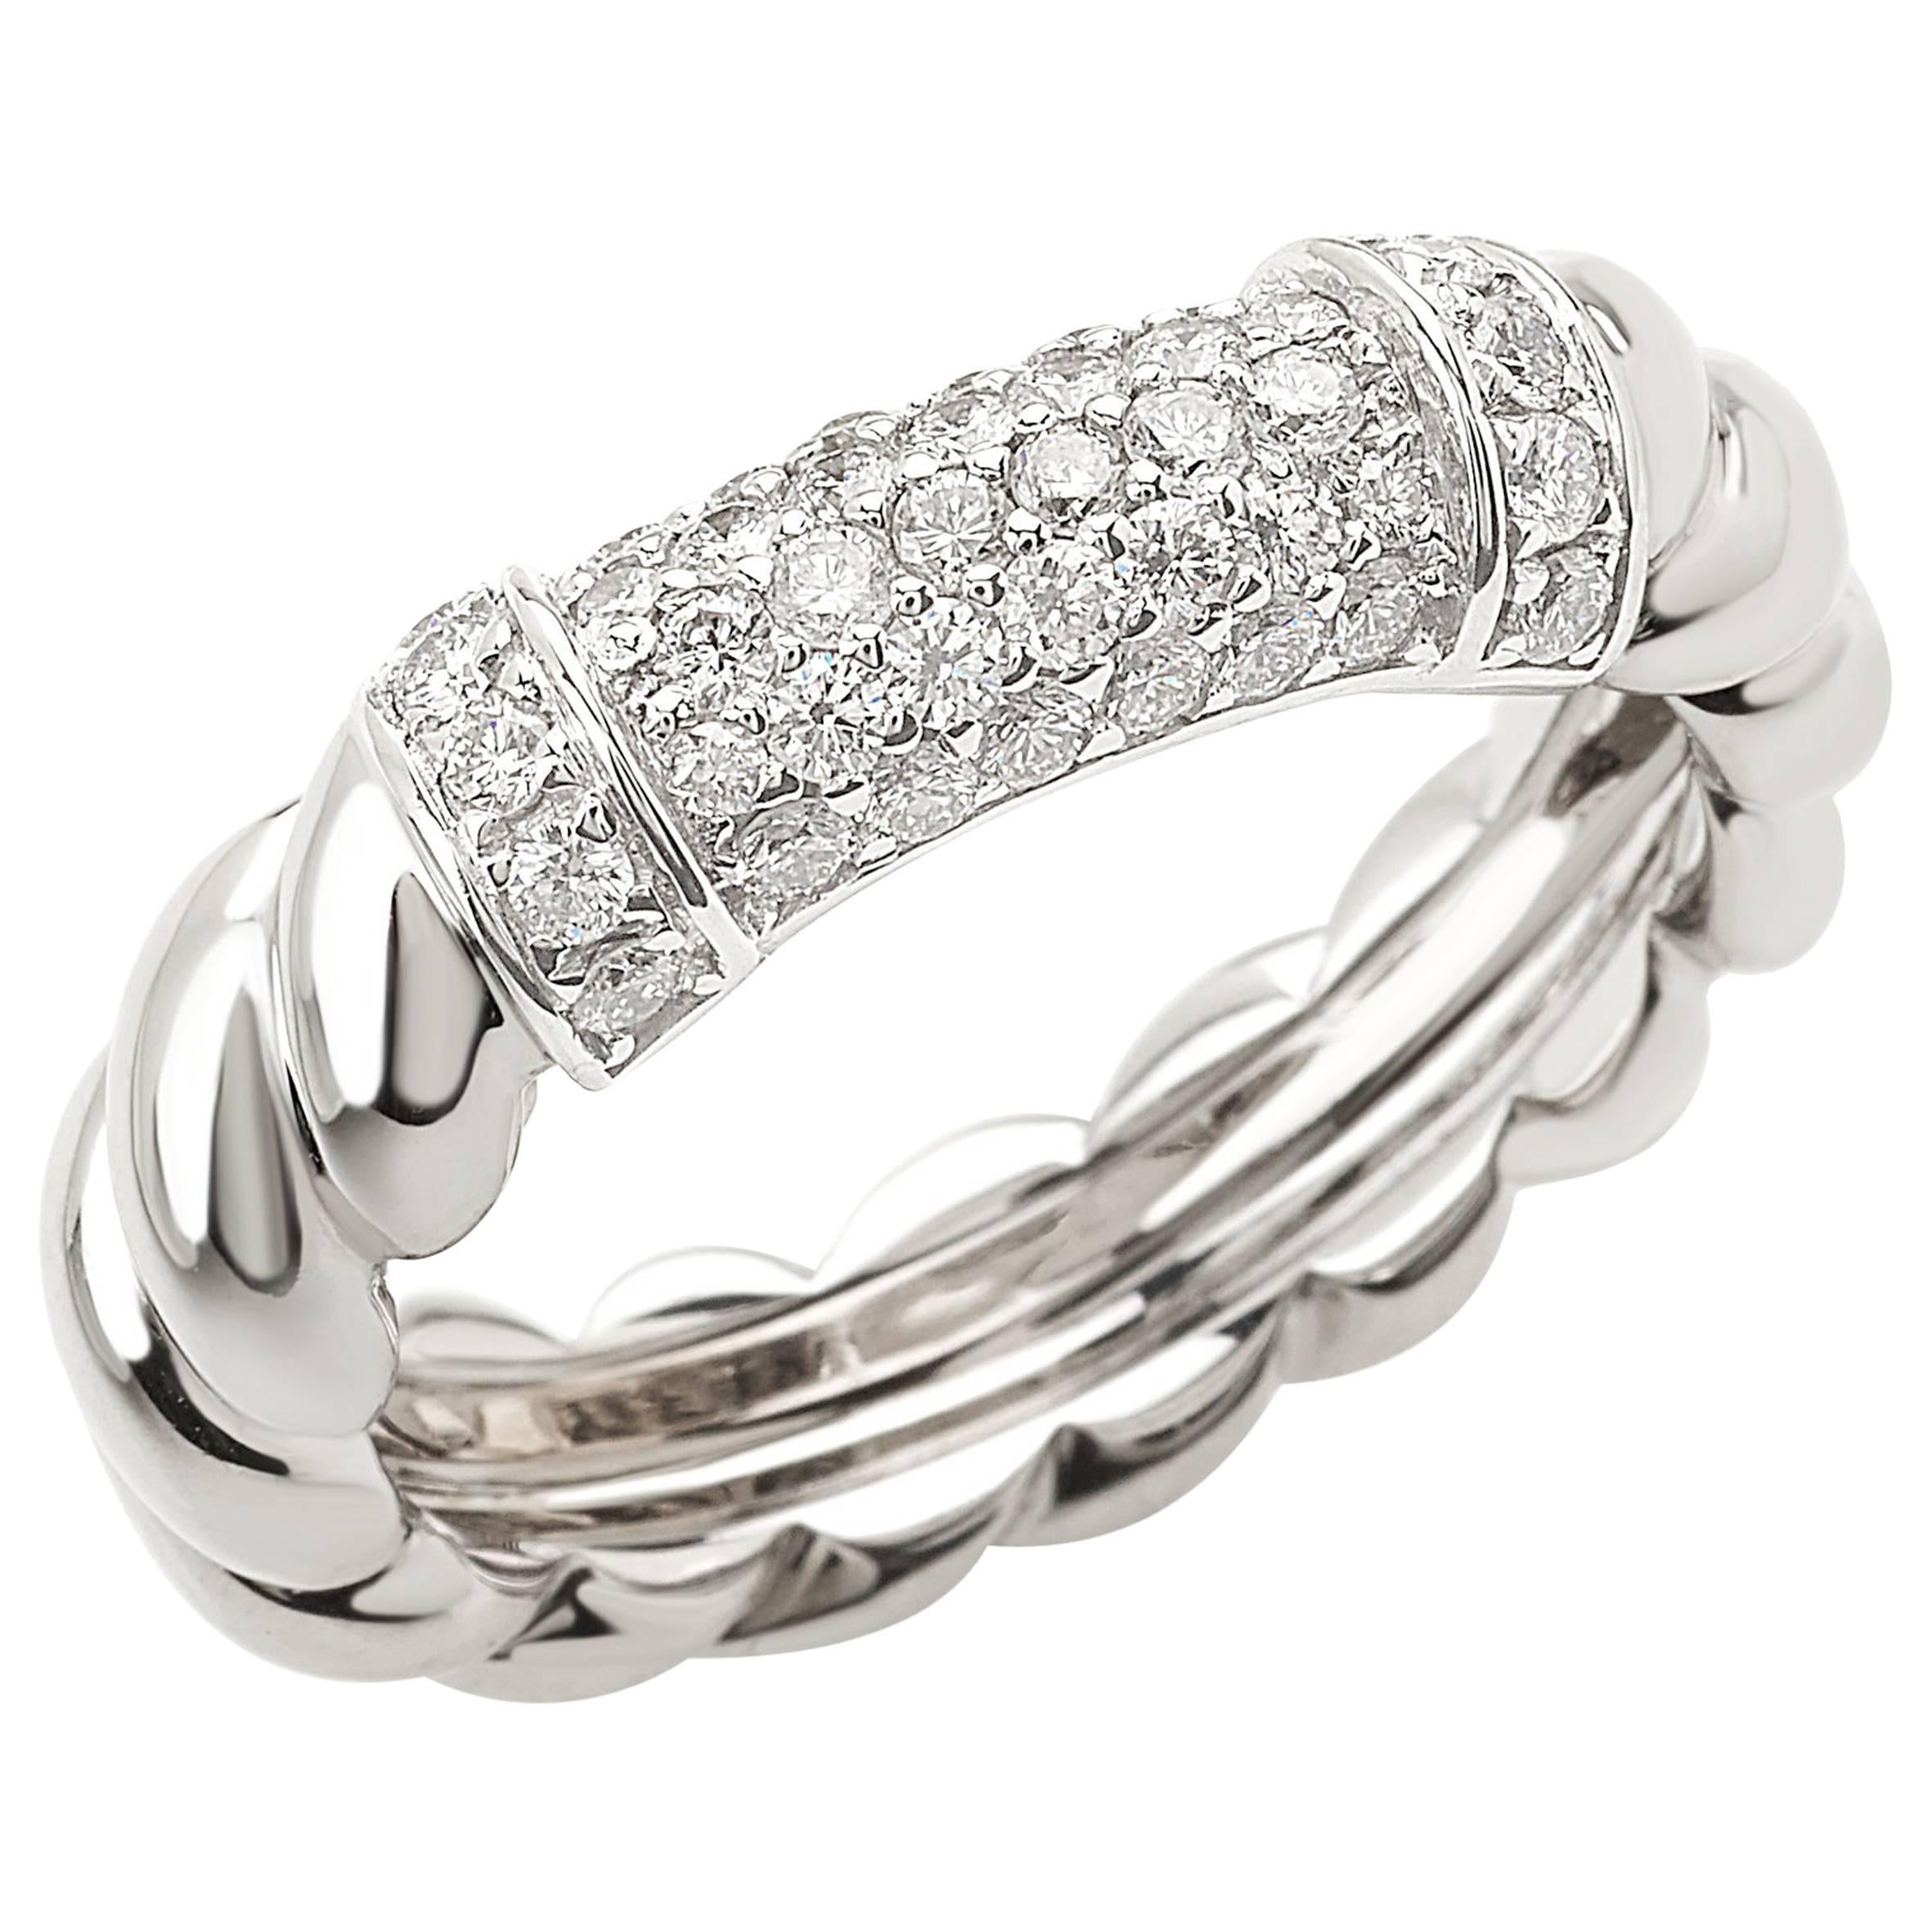 Ring from the Collection "Rope" 18 Karat White Gold and Diamonds